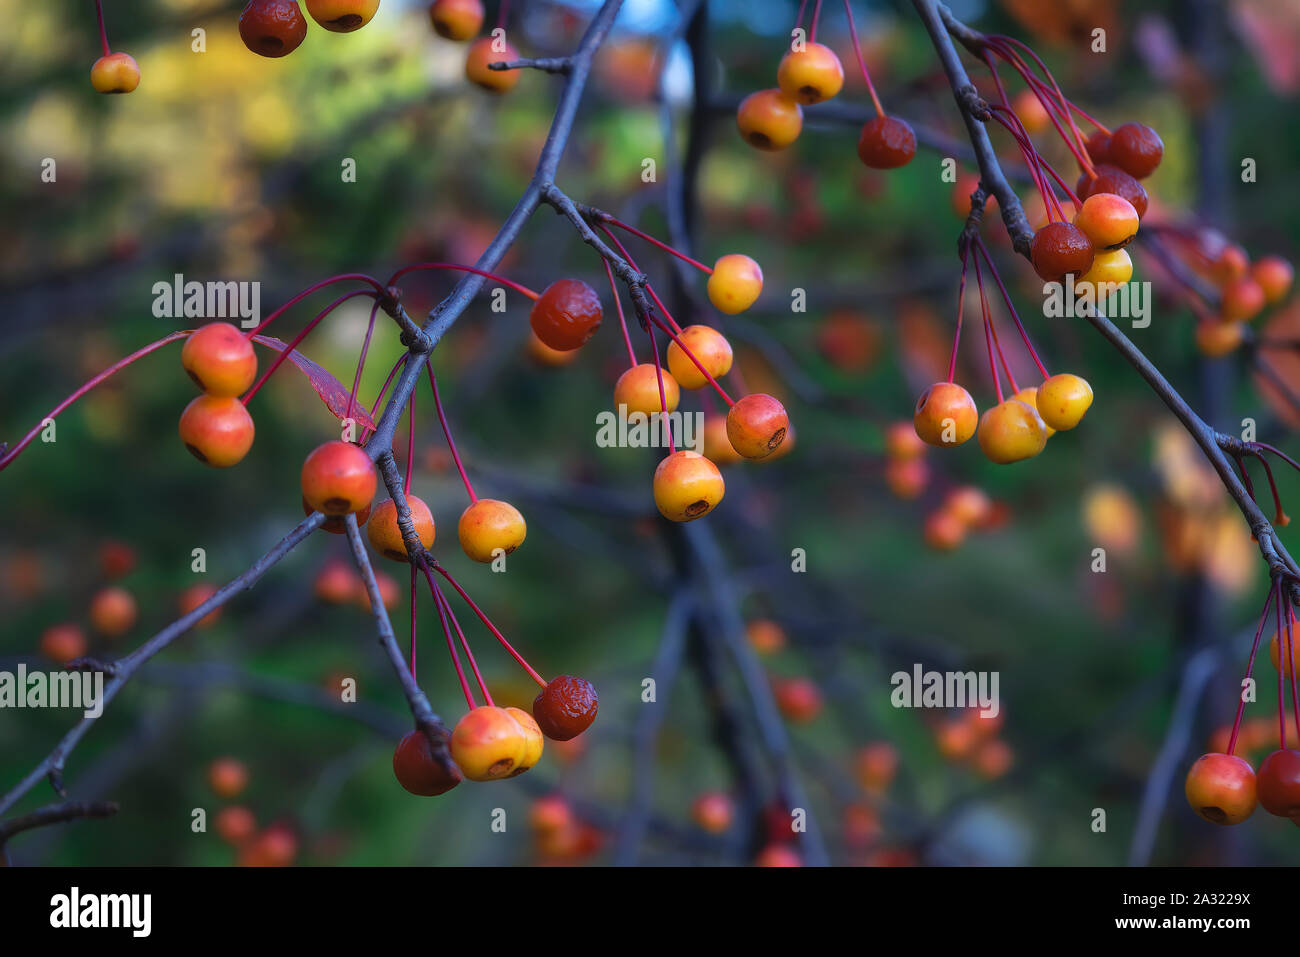 Siberian crab apple Malus baccata red berries hanging on branch. Selective focus and shallow depth of field. Stock Photo